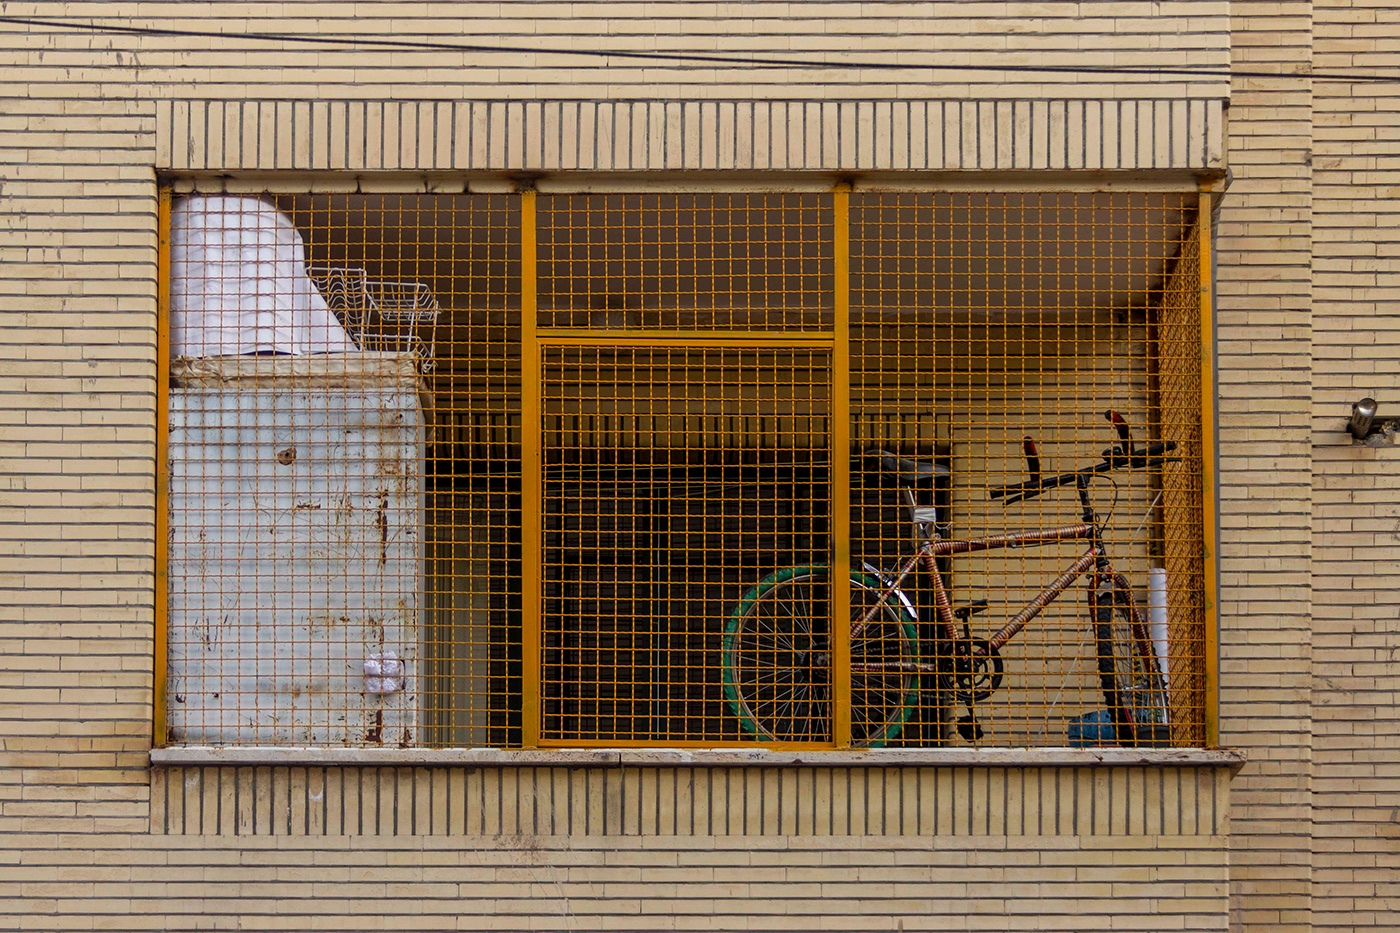 Bicycle Bike dacumentry dacumentry photography daily shots Iran photo Photography  Street street_photography